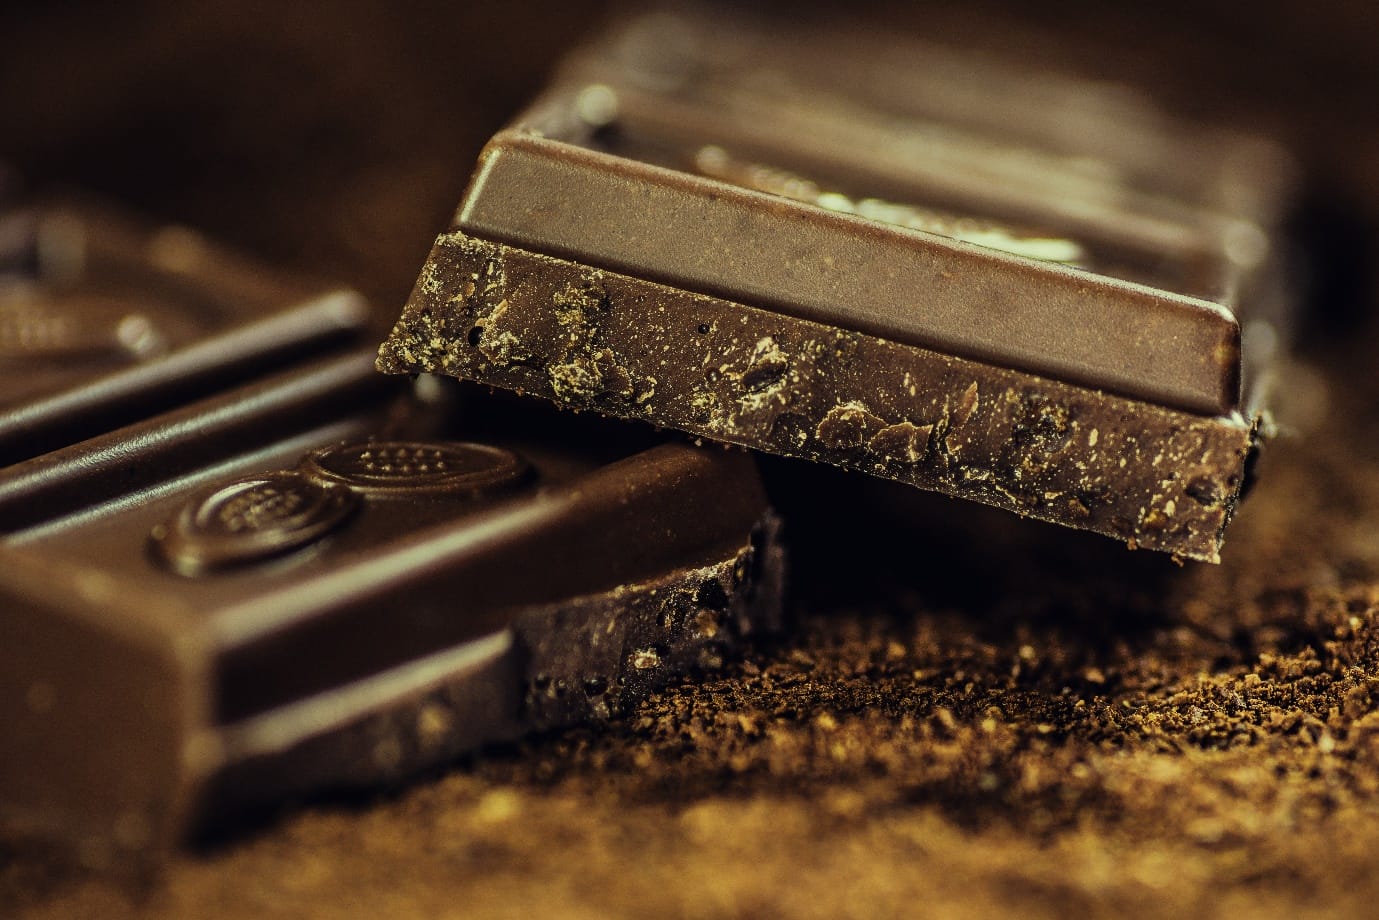 Top 5 Ways to Work with Chocolate